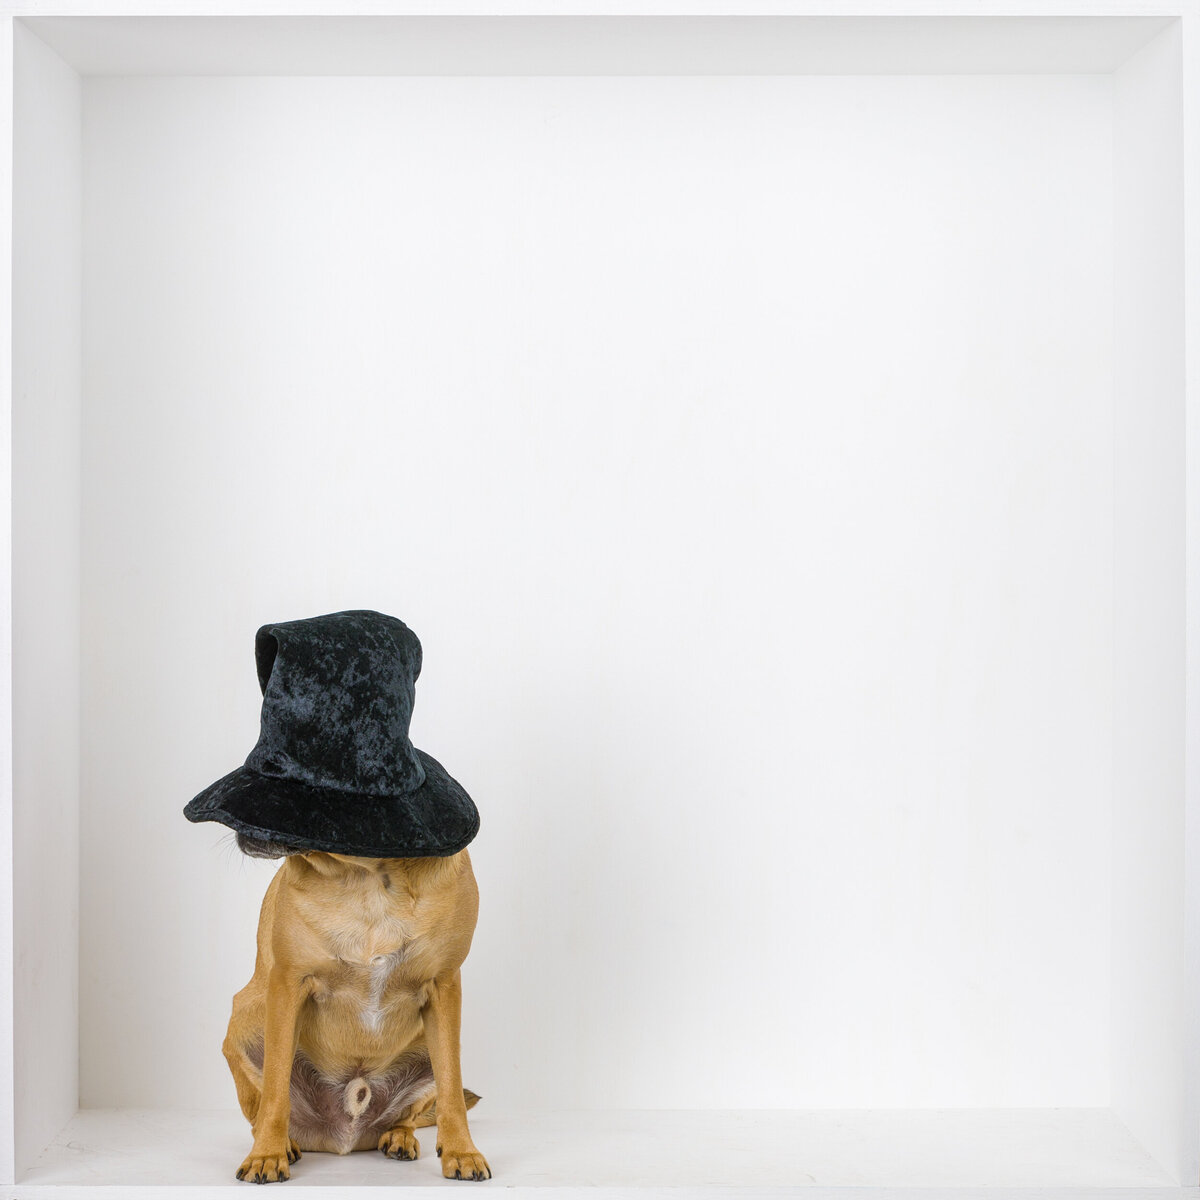 A dog earing a funny hat in a white box